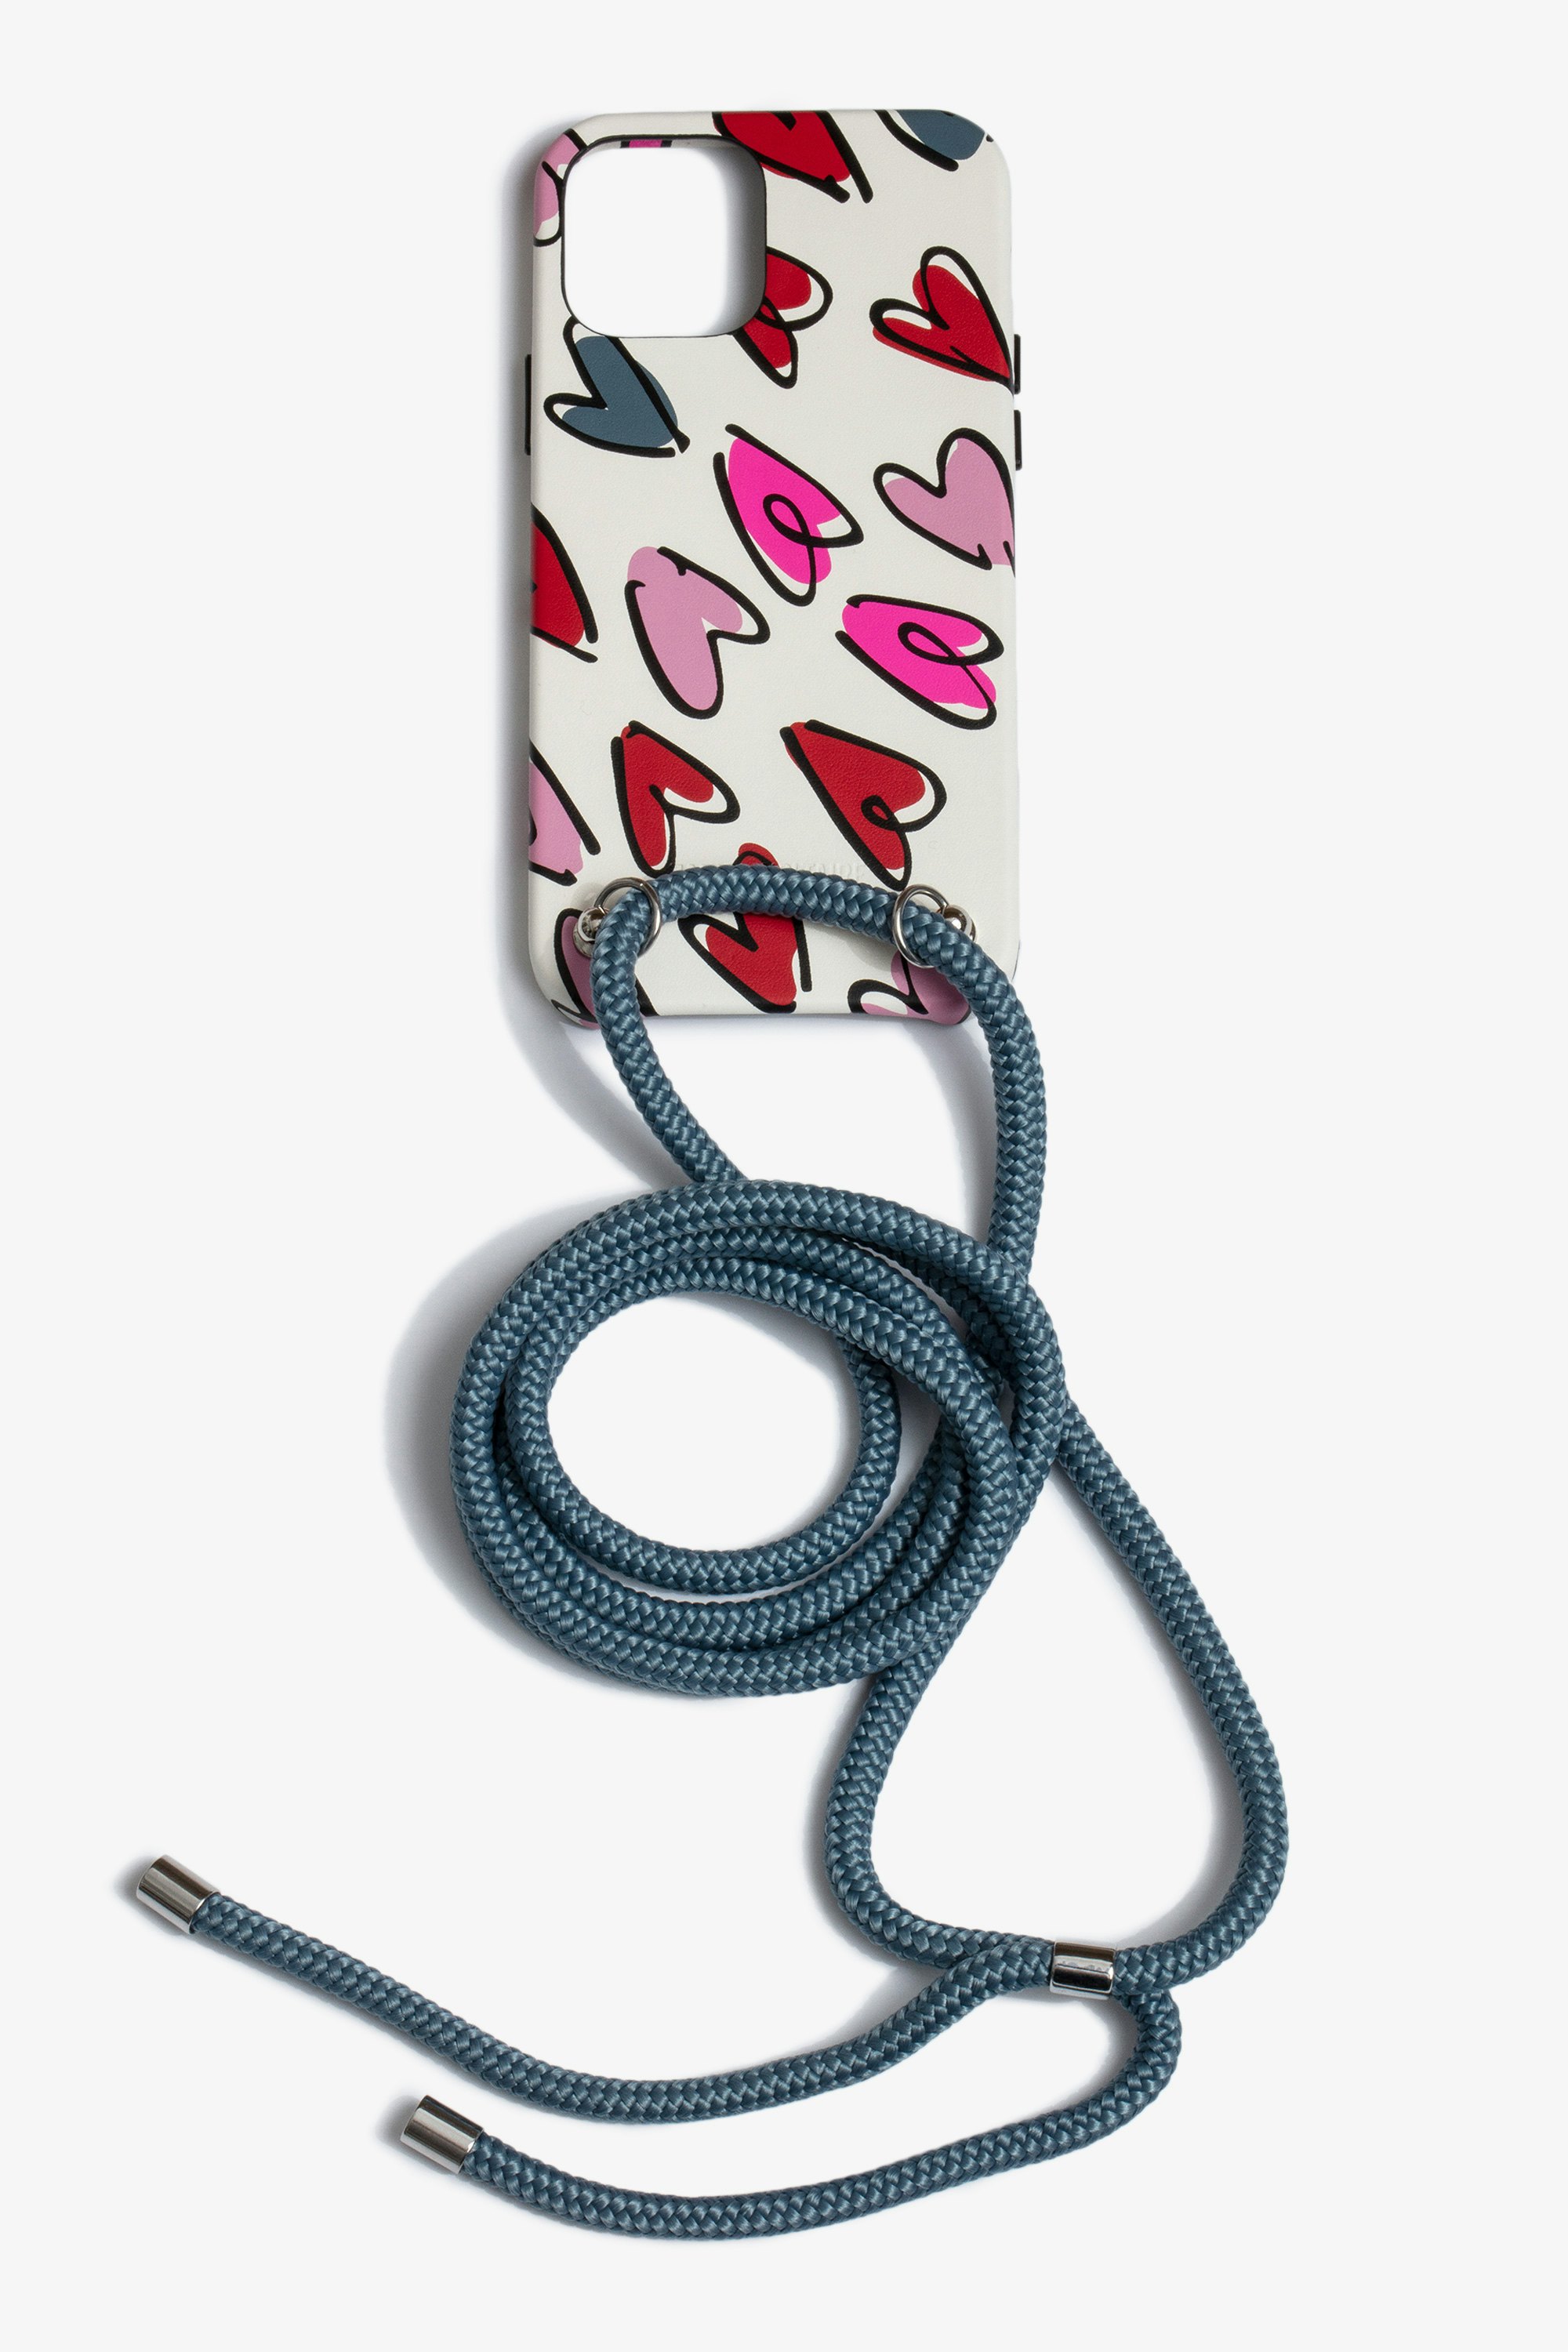 ZV Small Heart Rope iPhone 12 ケース Women’s iPhone 12 cover with a cord to wear around your neck